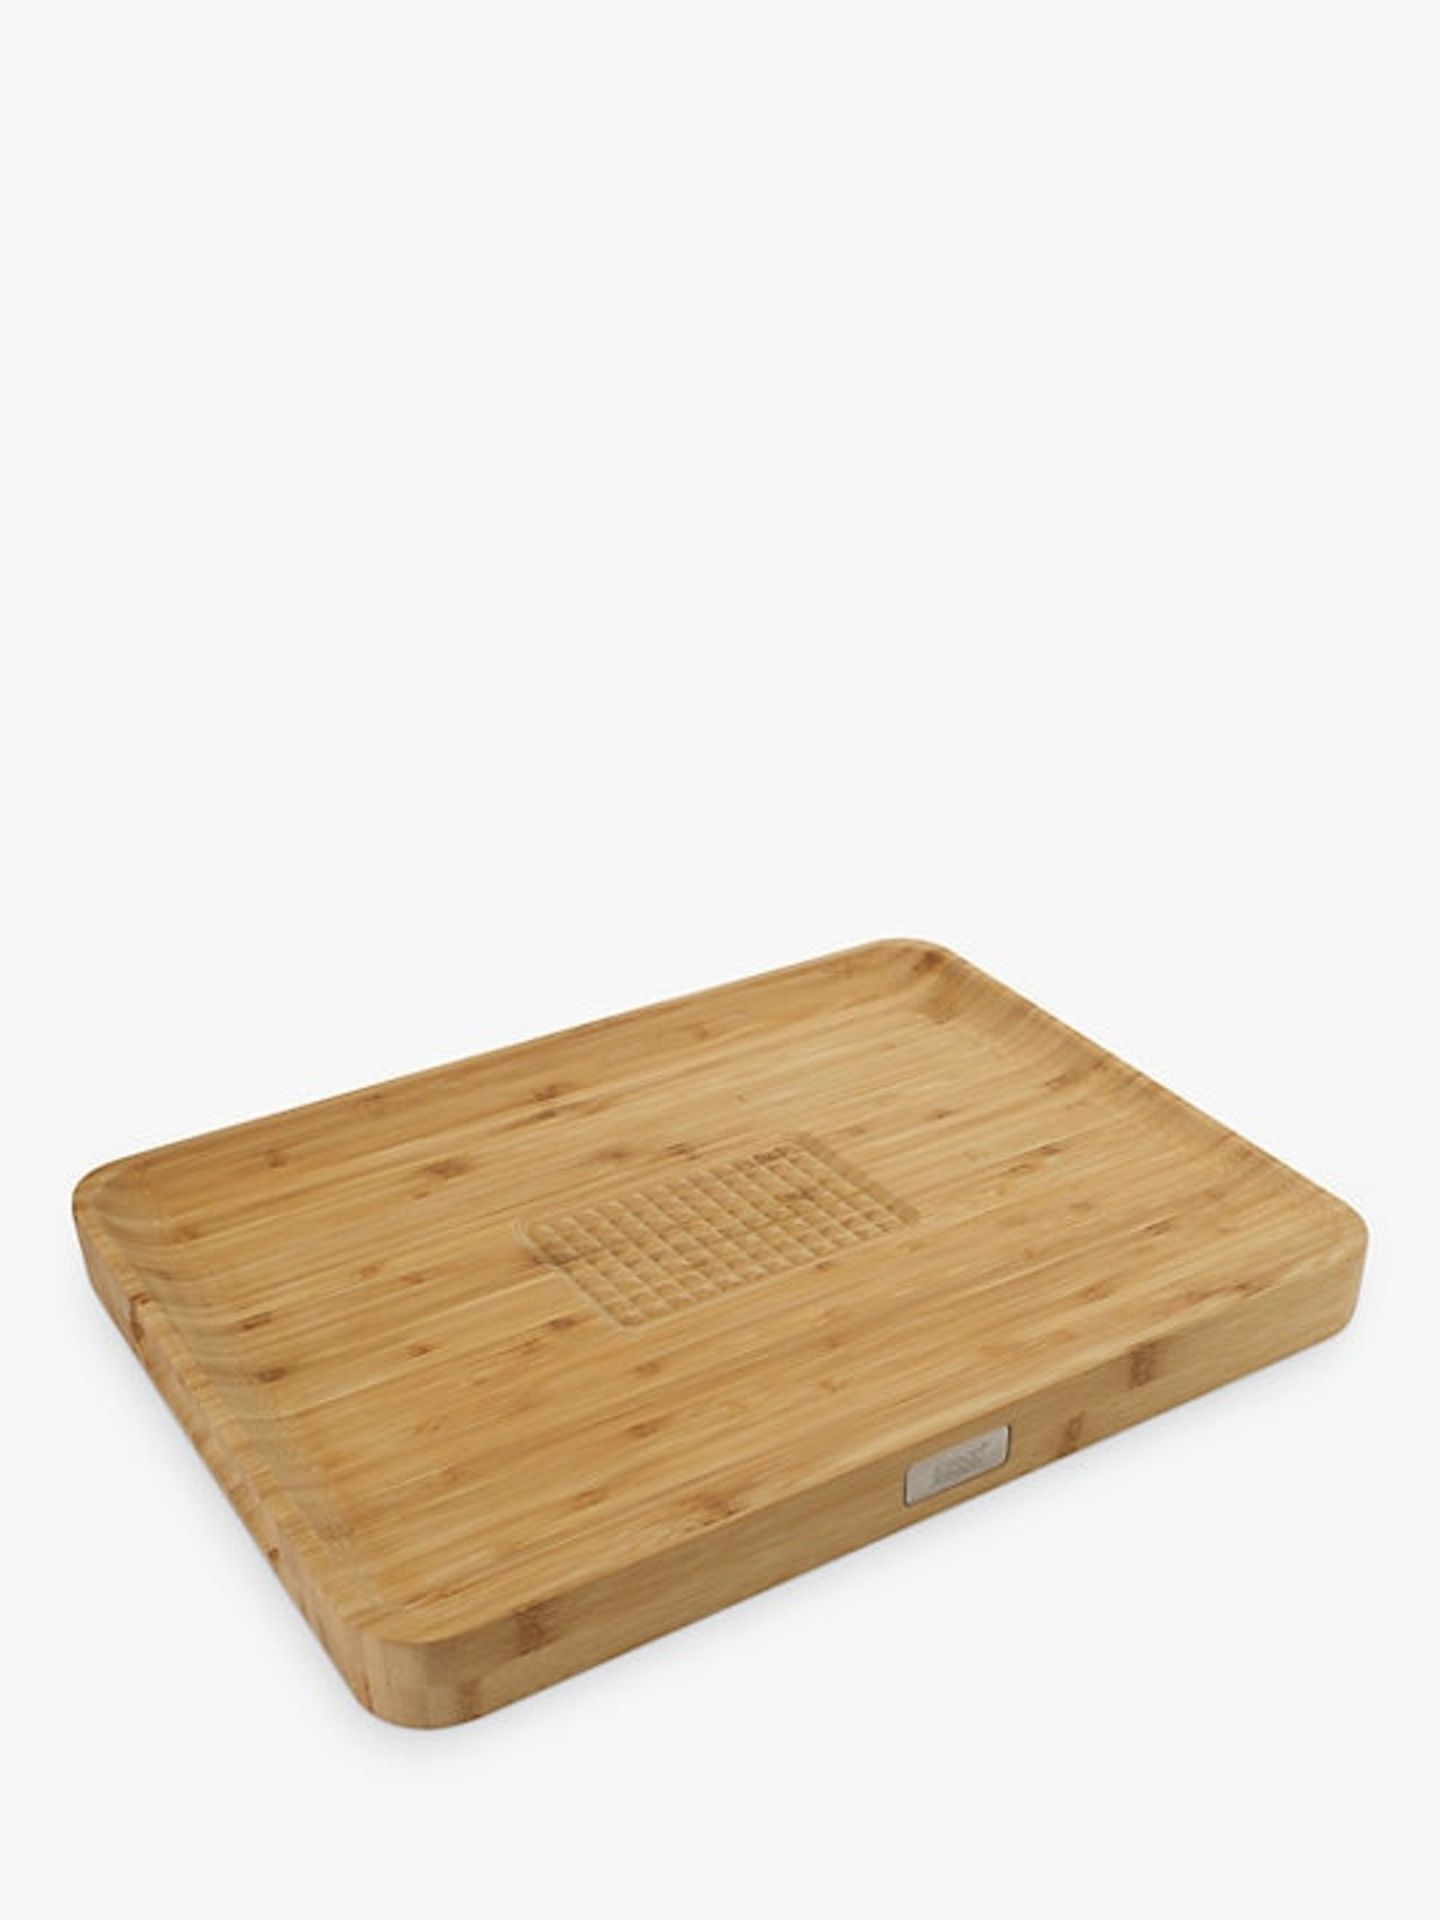 Pallet of Raw Customer Returns - Category - STANDARD KITCHENWARE - P100017124 - Image 22 of 29